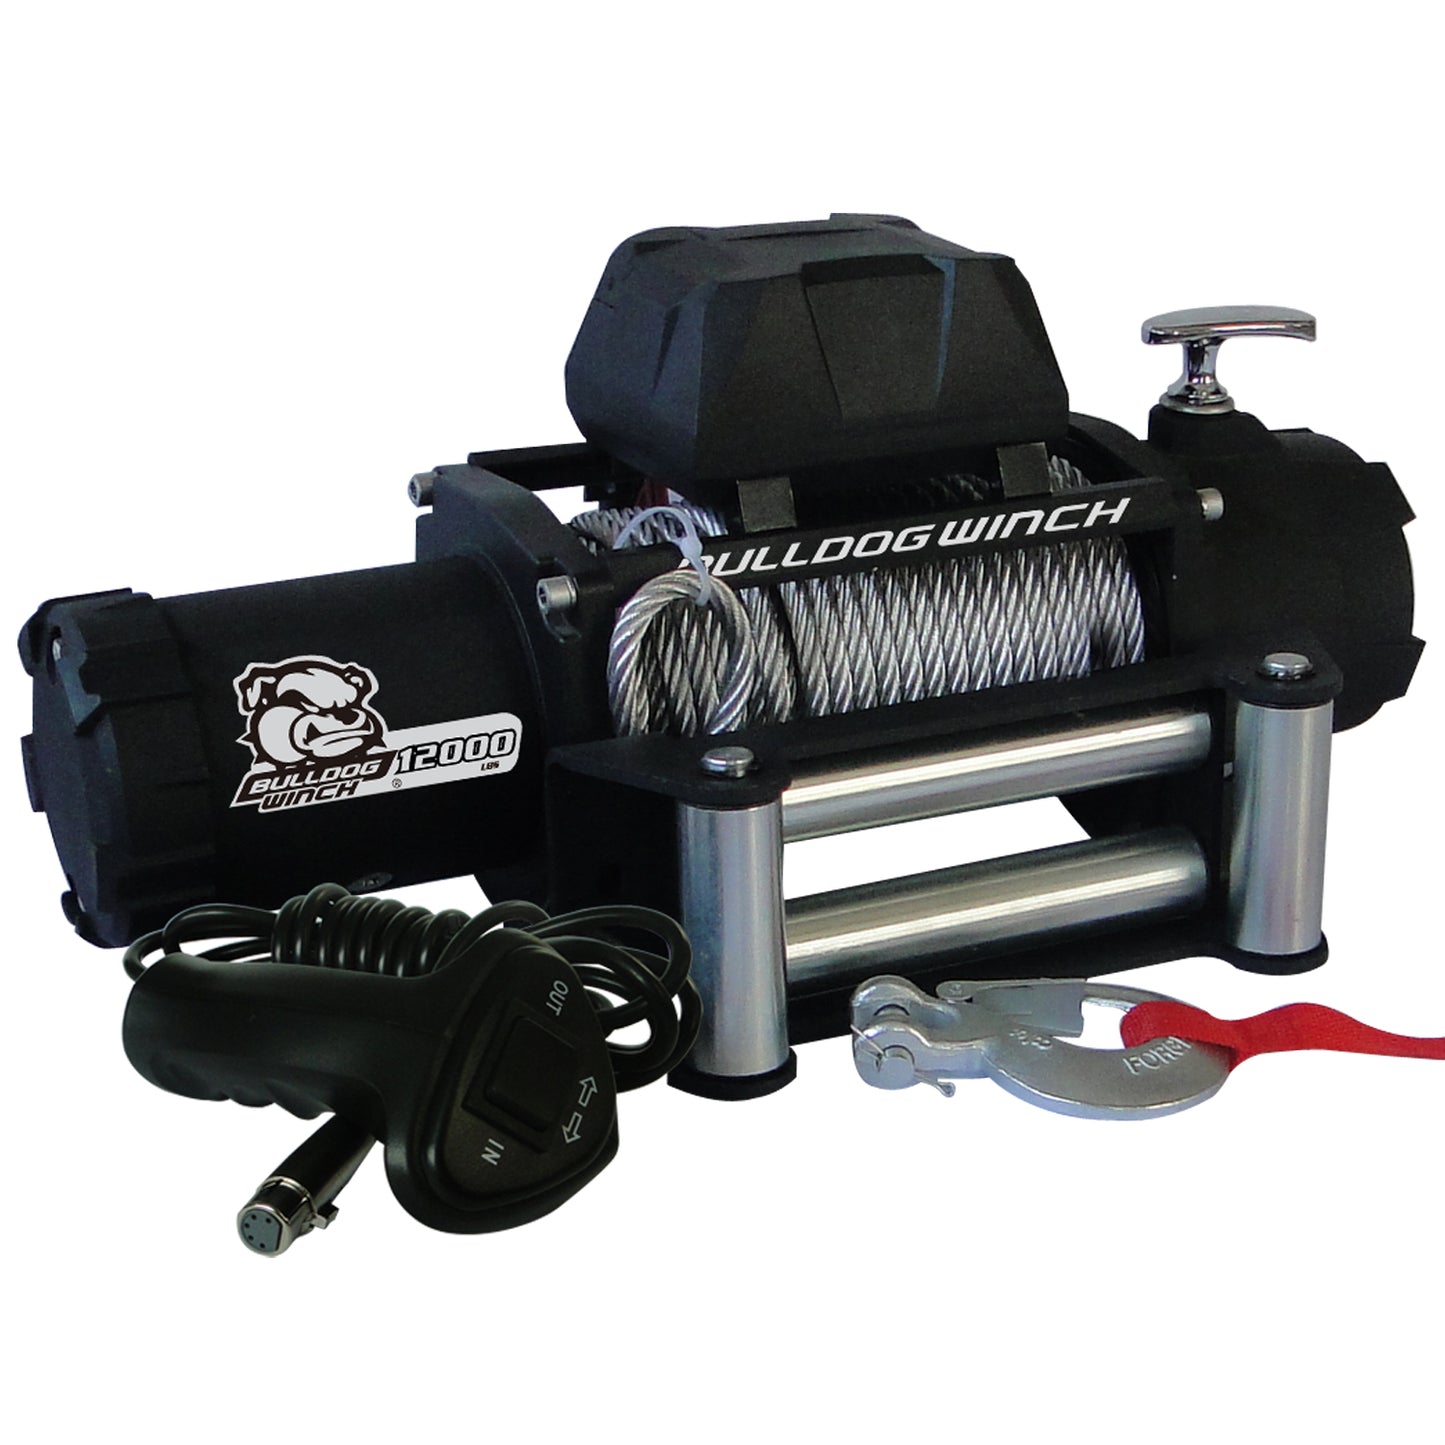 Bulldog Winch 12,00 LB Winch 100 Ft Wire Rope 6.0hp Series Wound Motor Roller Fairlead